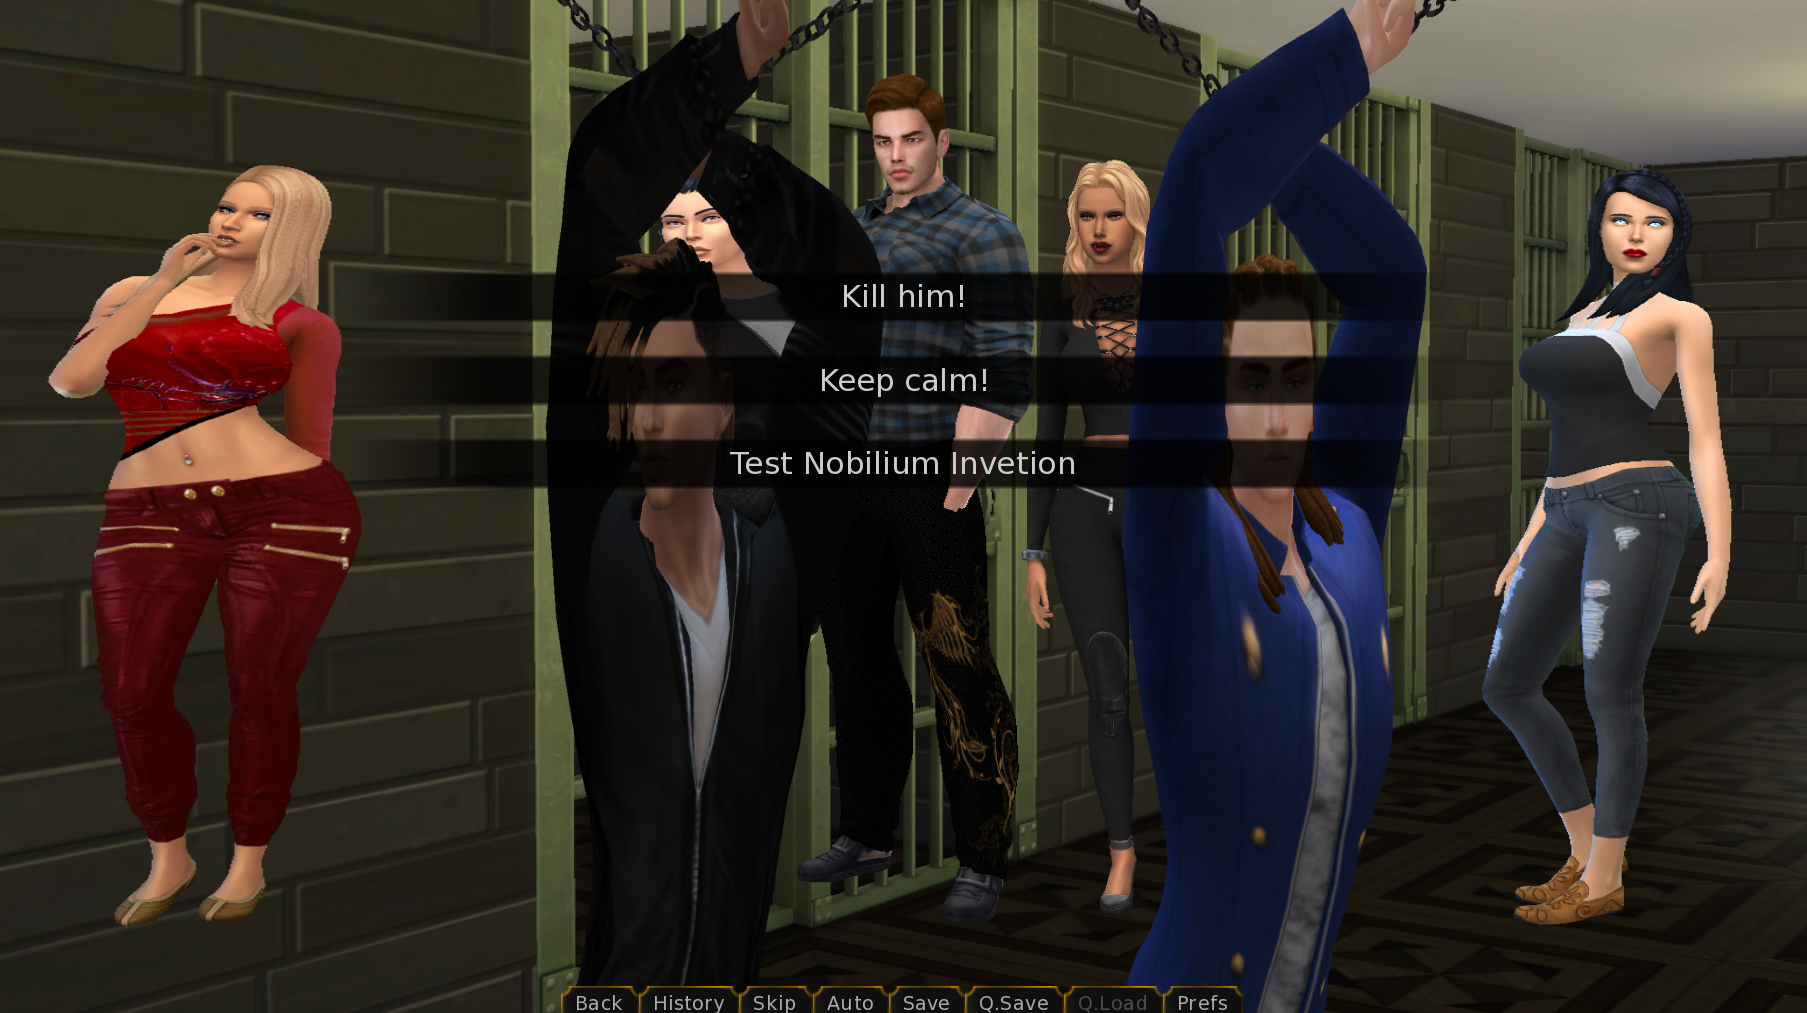 Screenshot - TDOS - 3 CHOISE IN JAIL ON OF THREE ROUTS.png